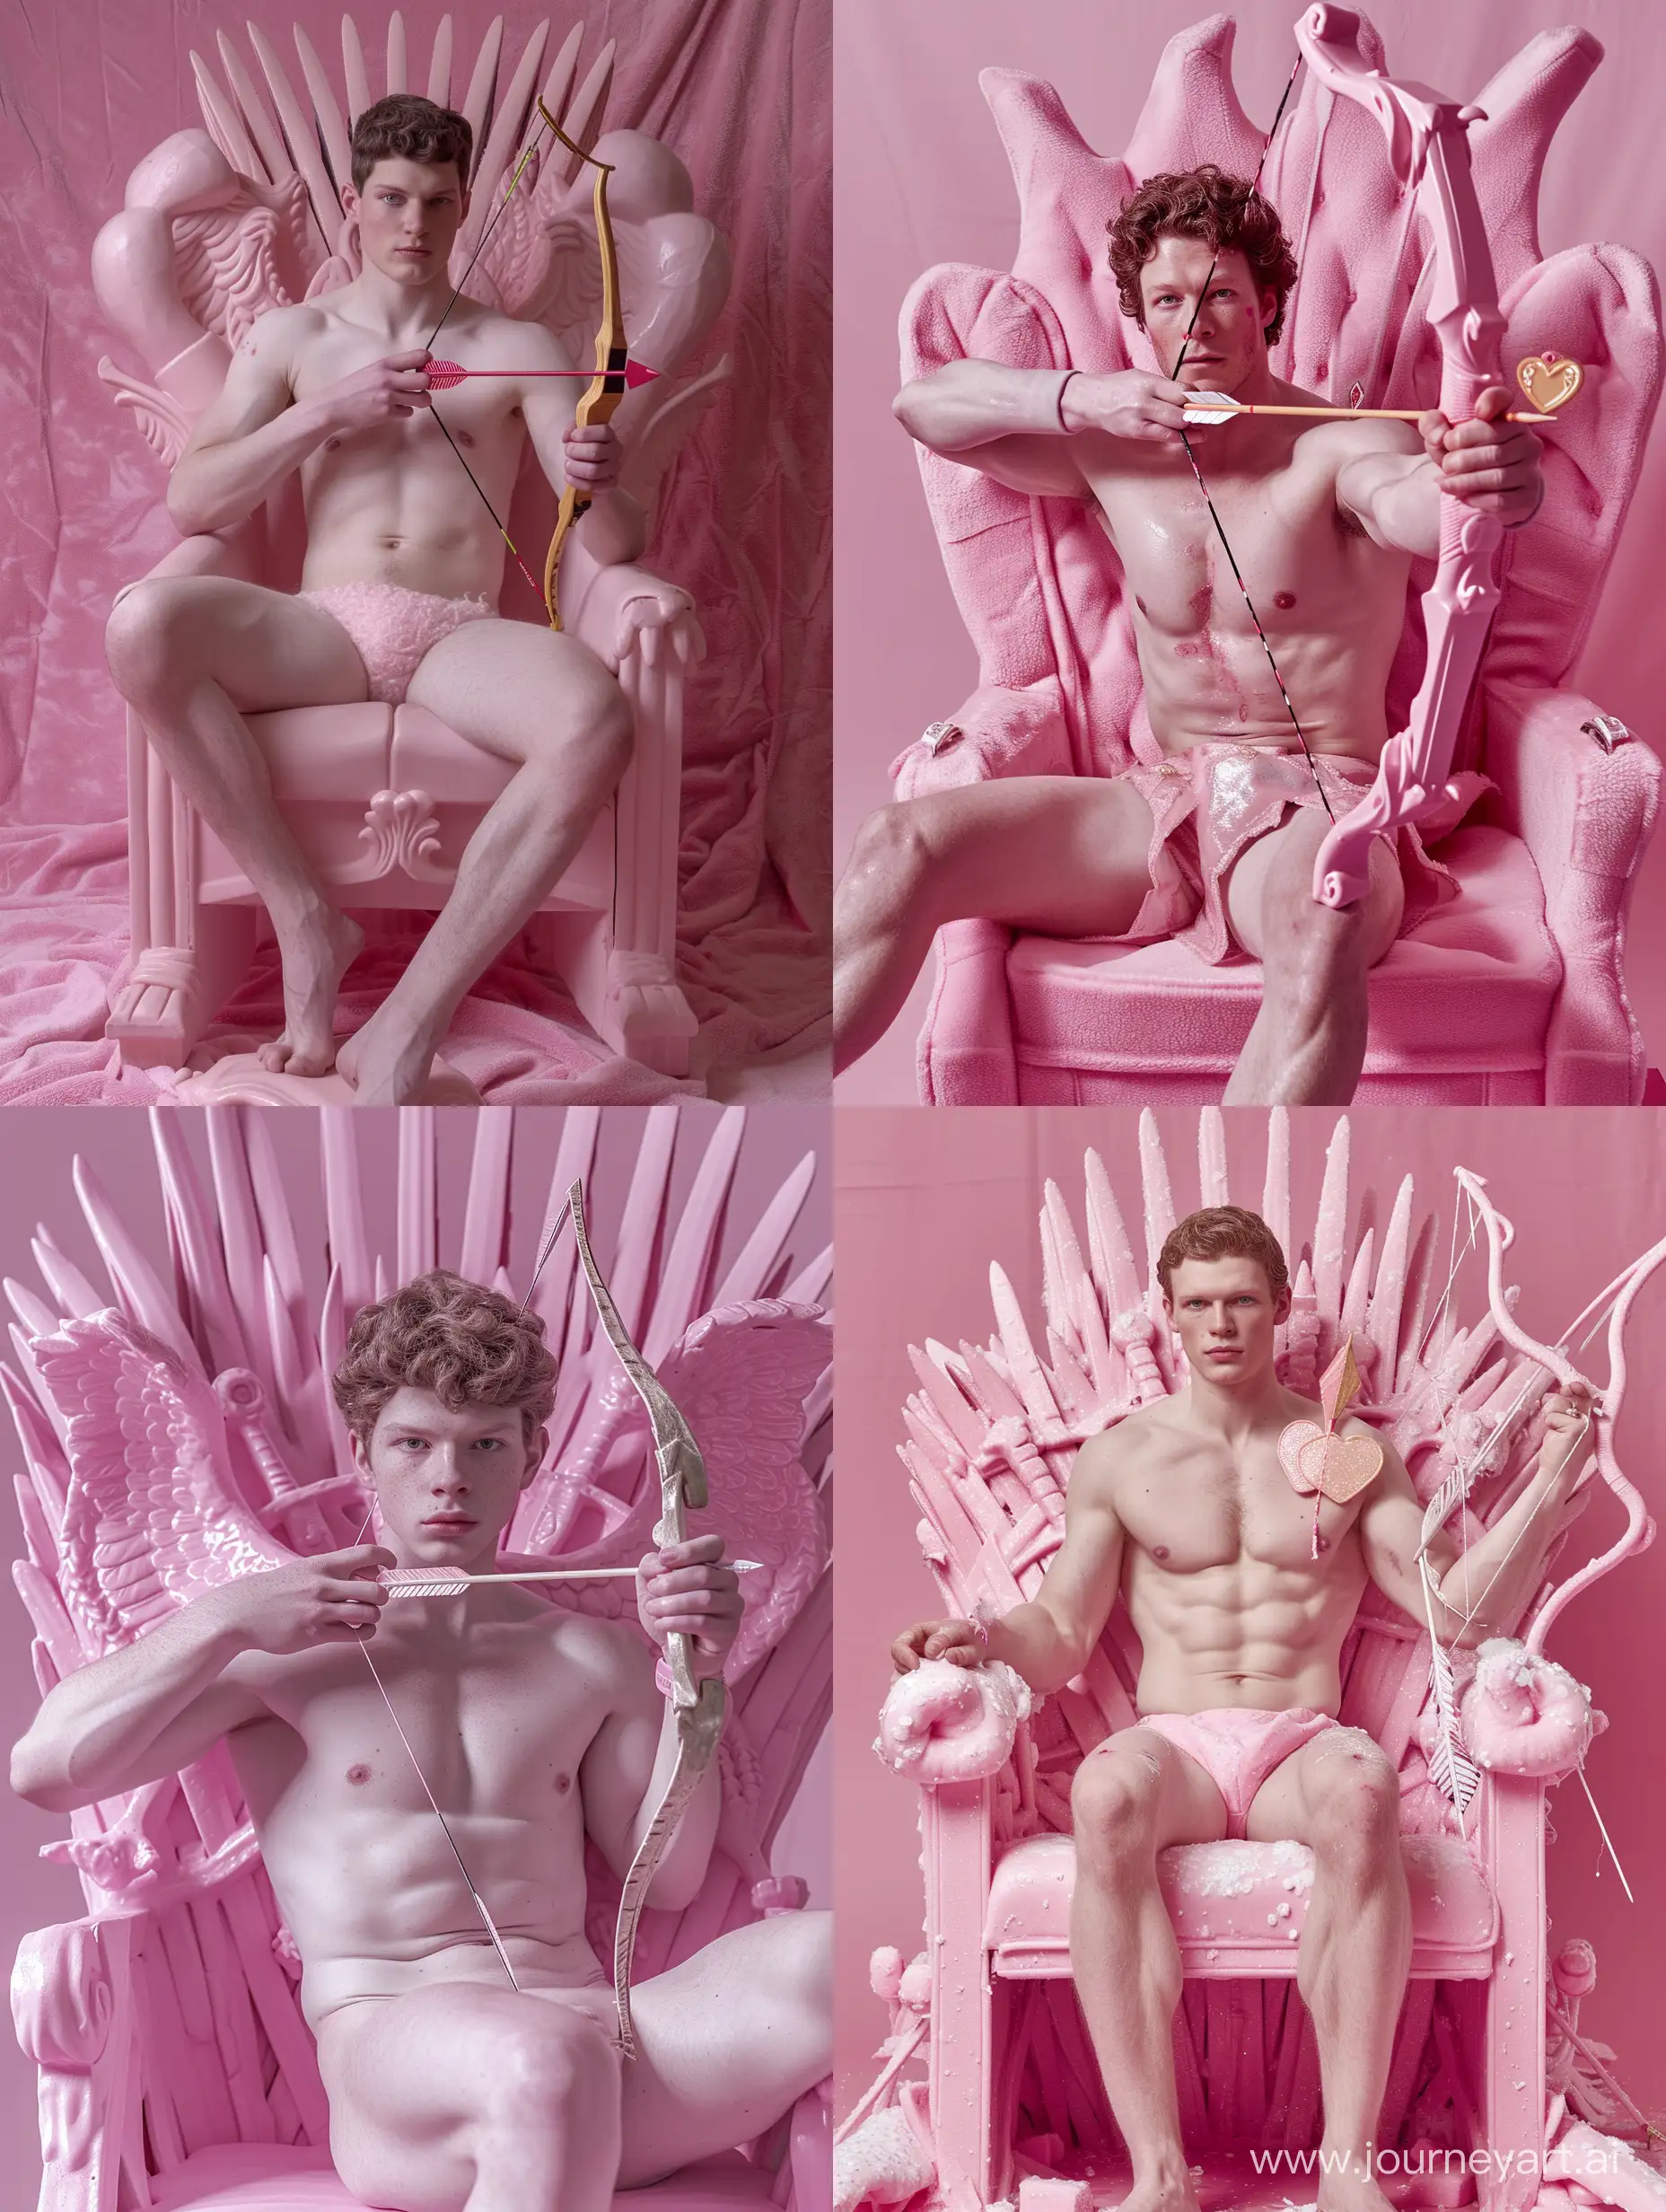 A 40-year-old cupid with a smooth face who weighs 80kg is sitting in a pink studio, in a pink throne (throne from Game of Thrones) with a toy bow in his hand and an arrow with a heart, his face is open and looks straight, photo 35mm of 200 scratches and dust chromatic aberration slow shutter